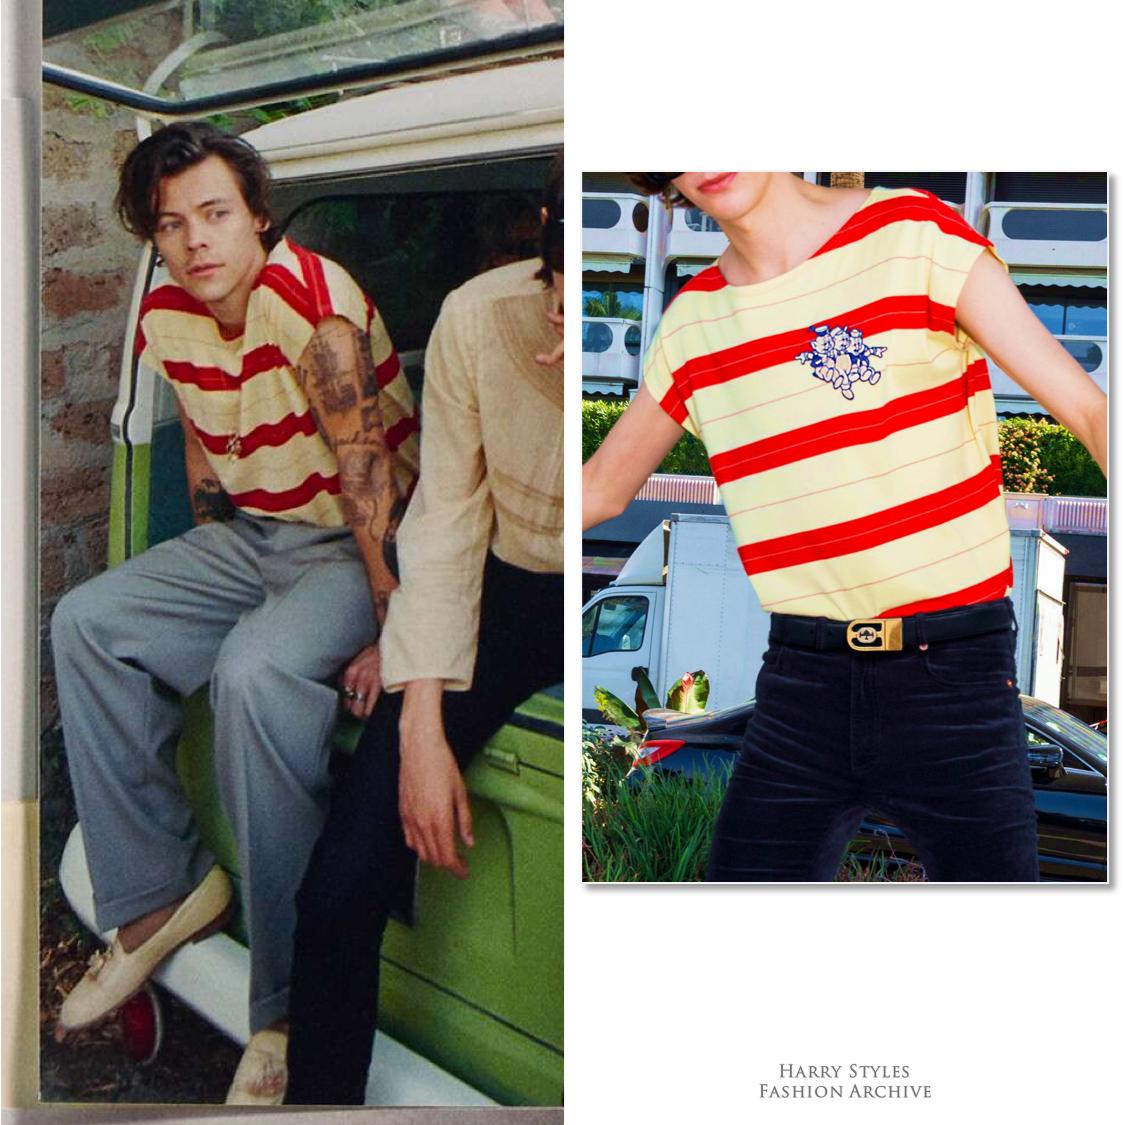 Harry Styles Fashion Archive on X: Harry Styles for #GucciMémoire